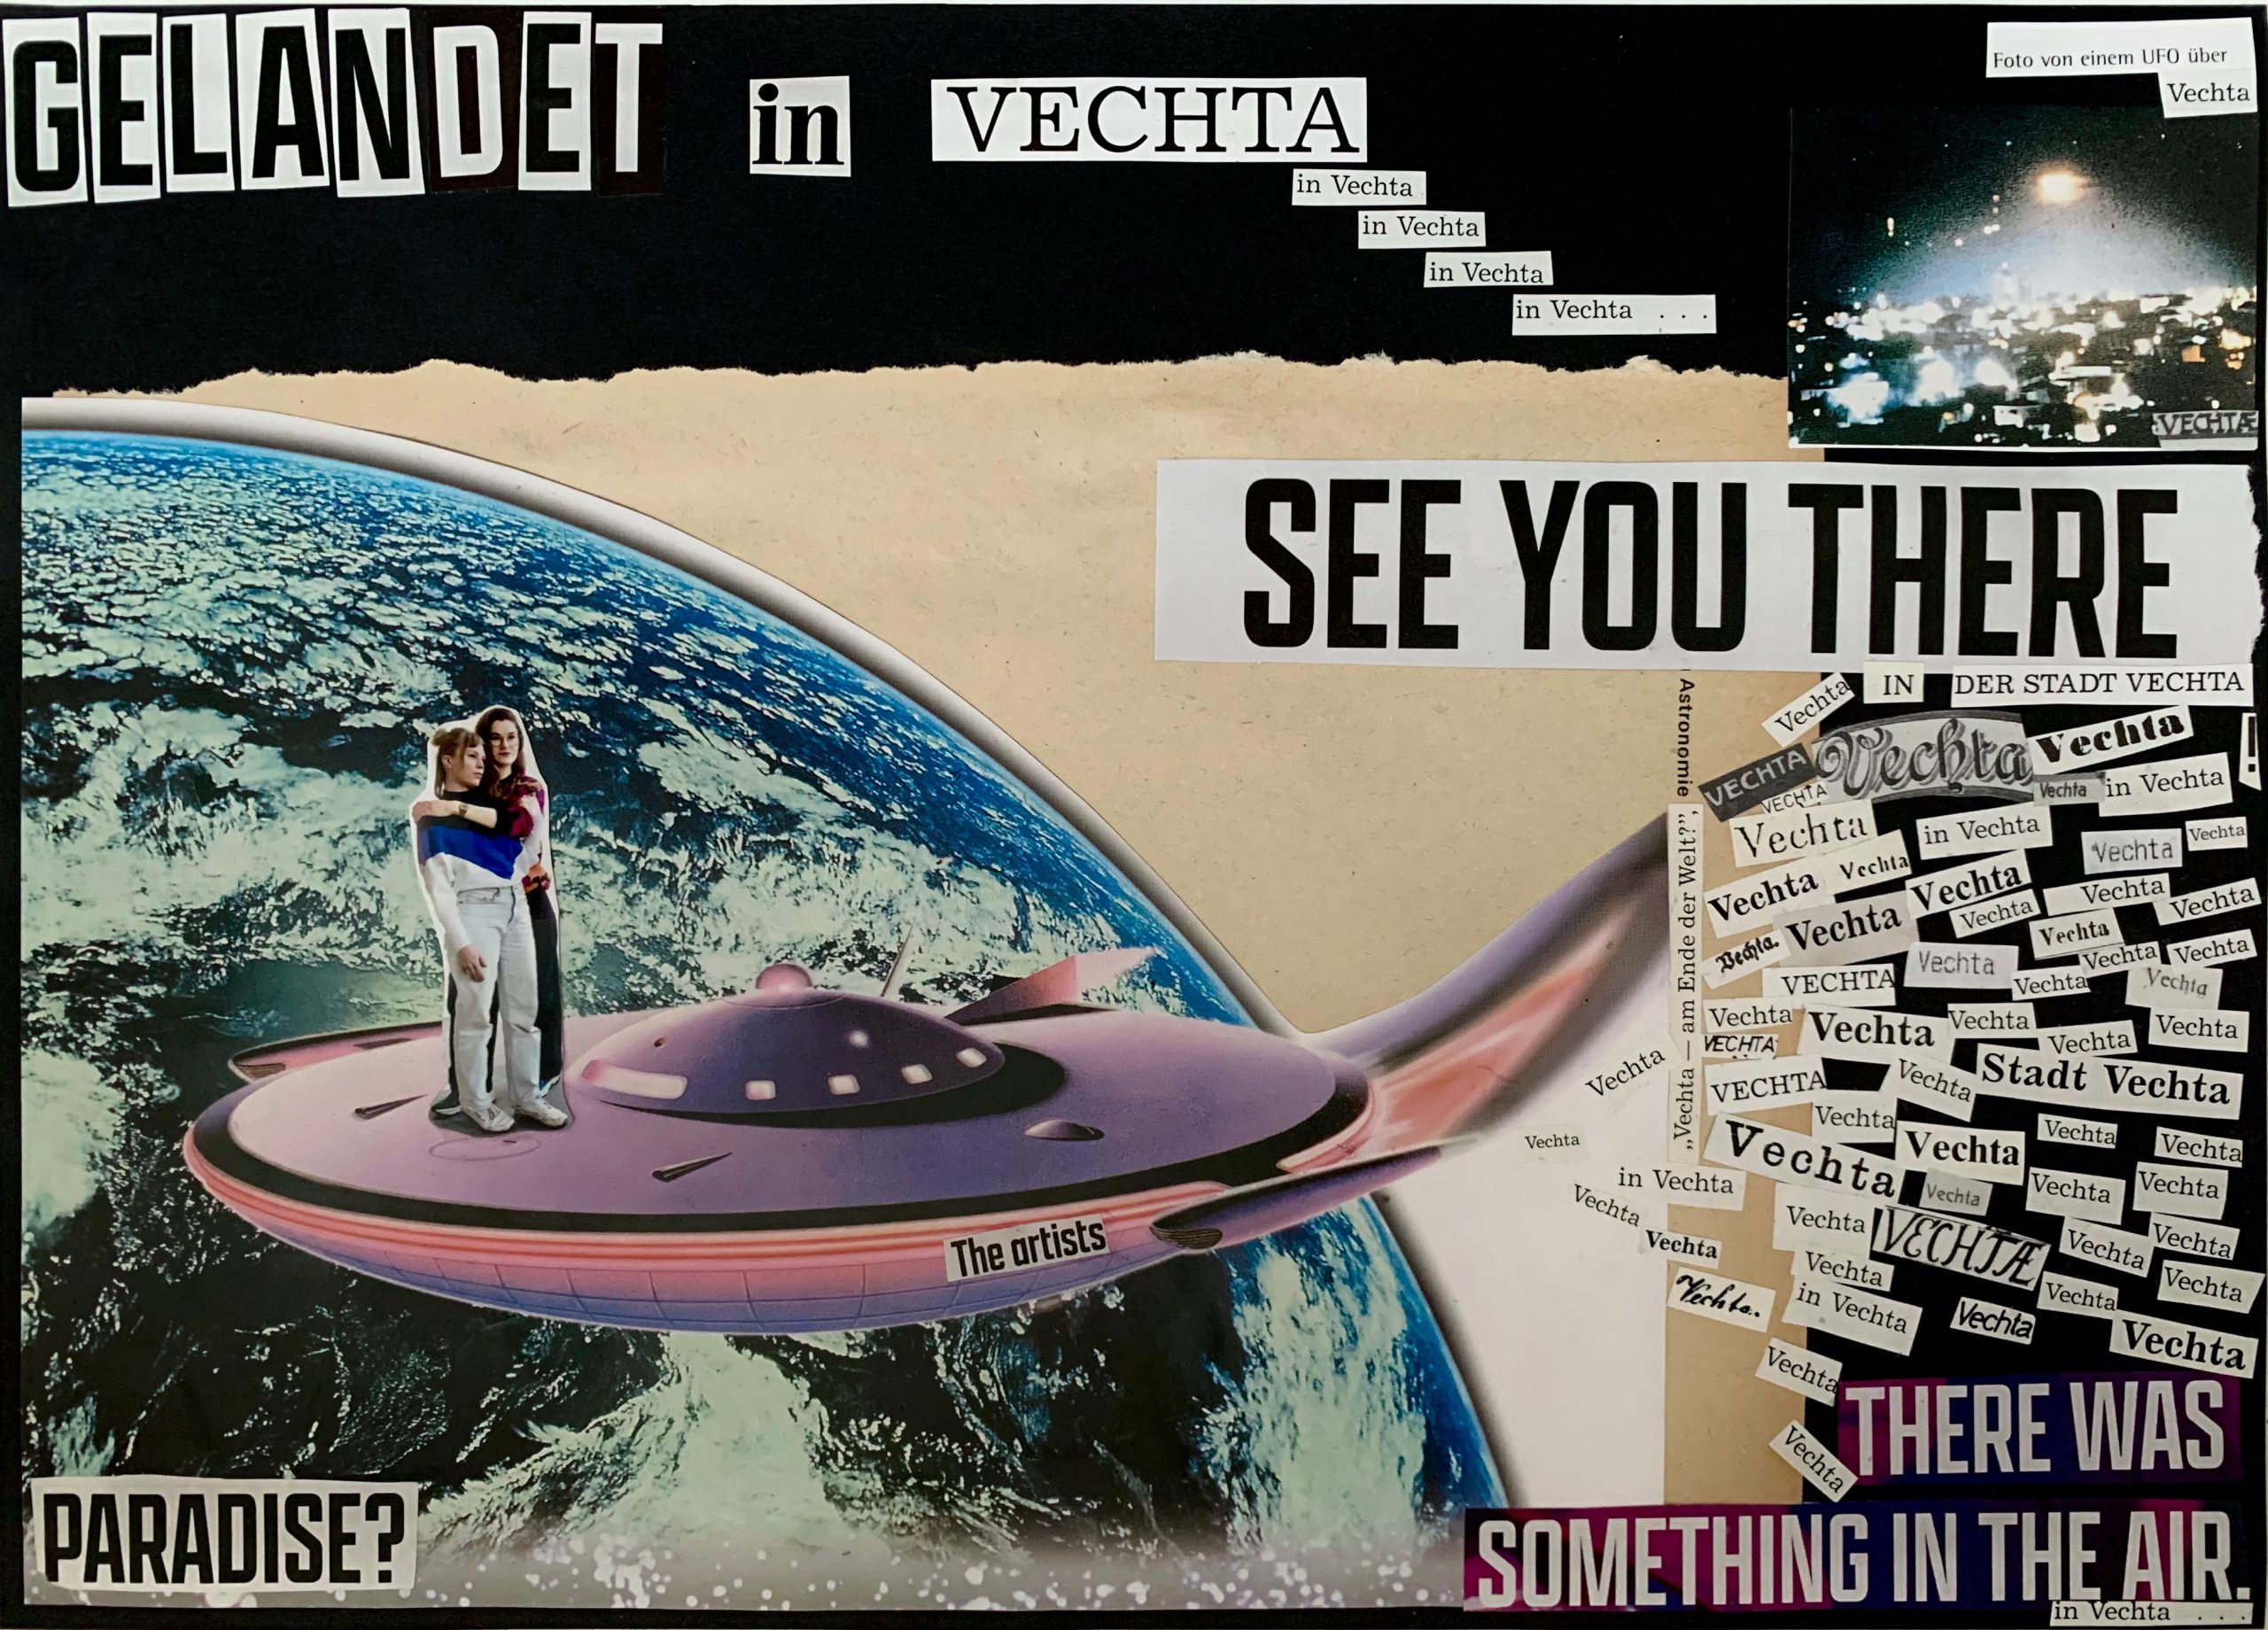 You are currently viewing Gelandet im Vechta-Universum